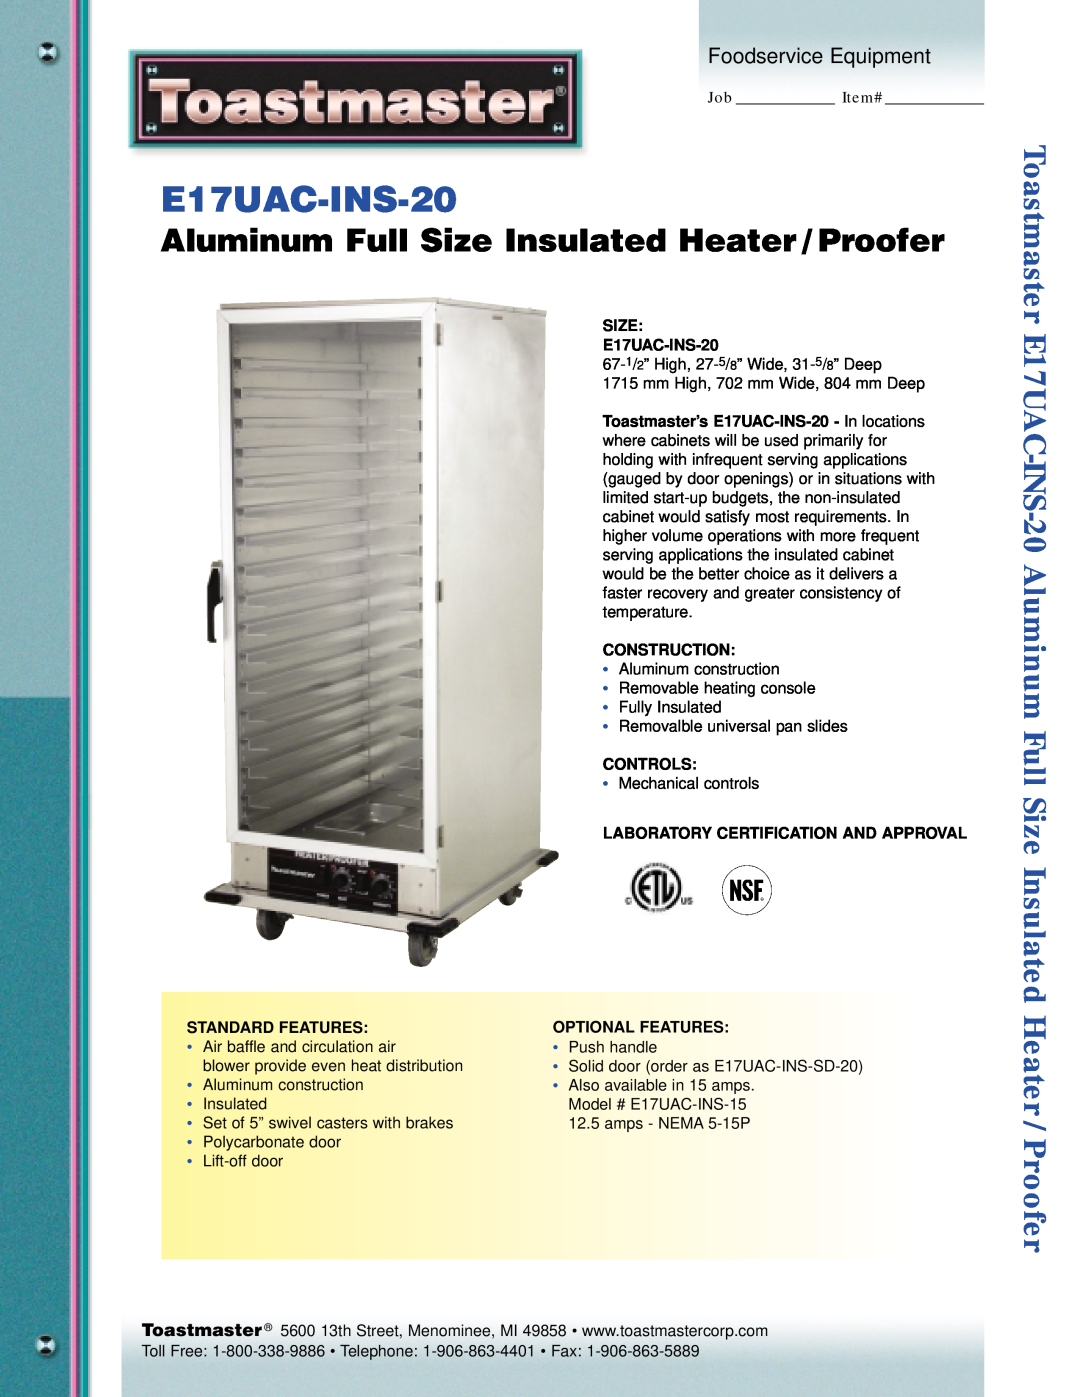 Toastmaster E17UAC-INS-20 manual Aluminum Full Size Insulated Heater / Proofer, Toastmaster, Foodservice Equipment 